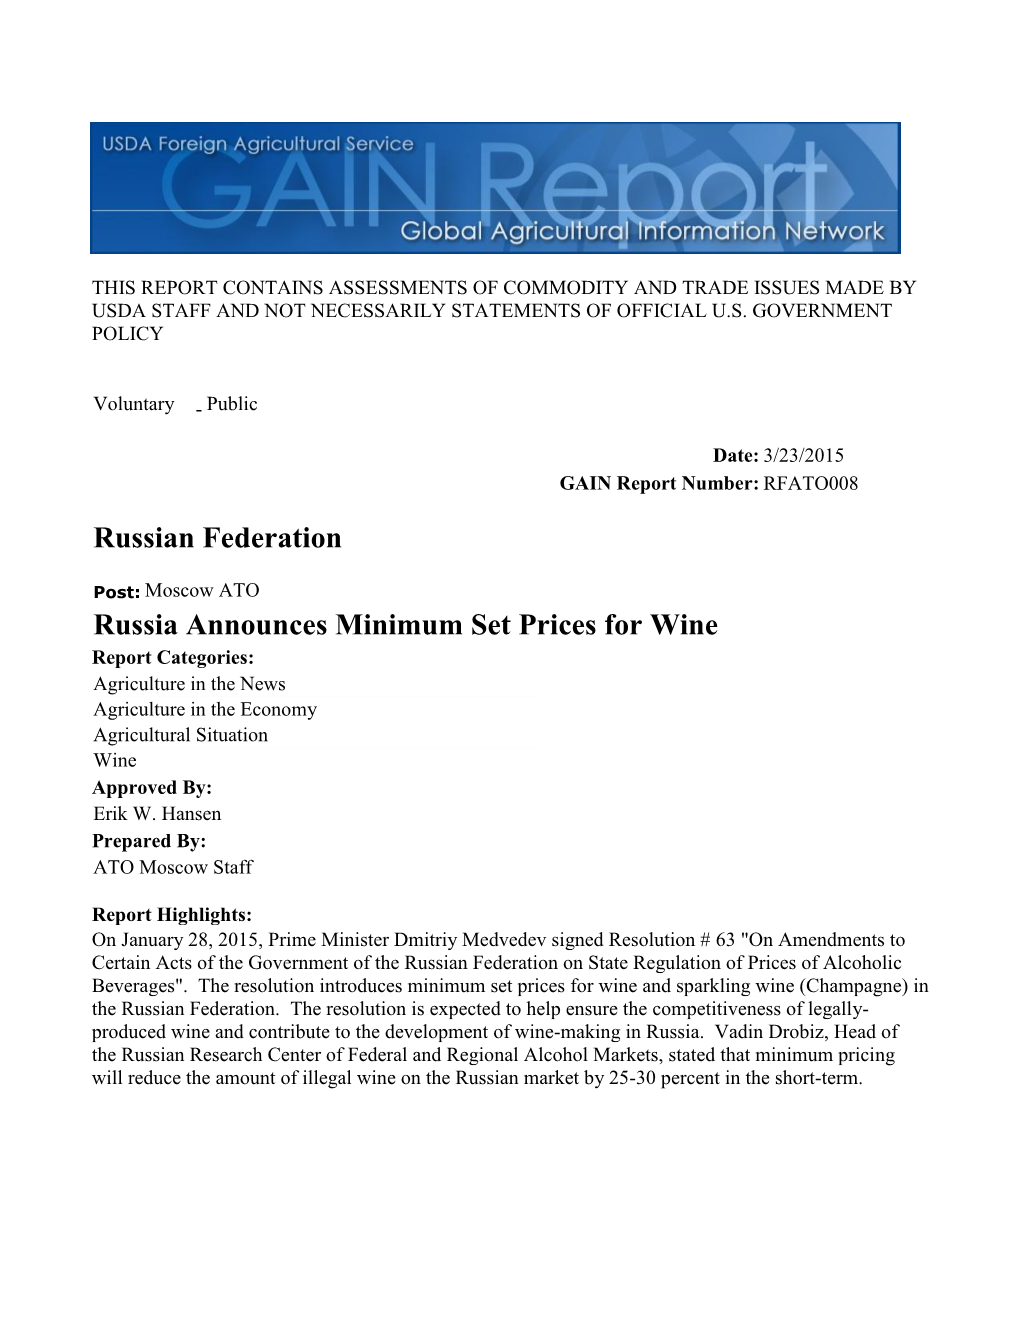 Russia Announces Minimum Set Prices for Wine Russian Federation